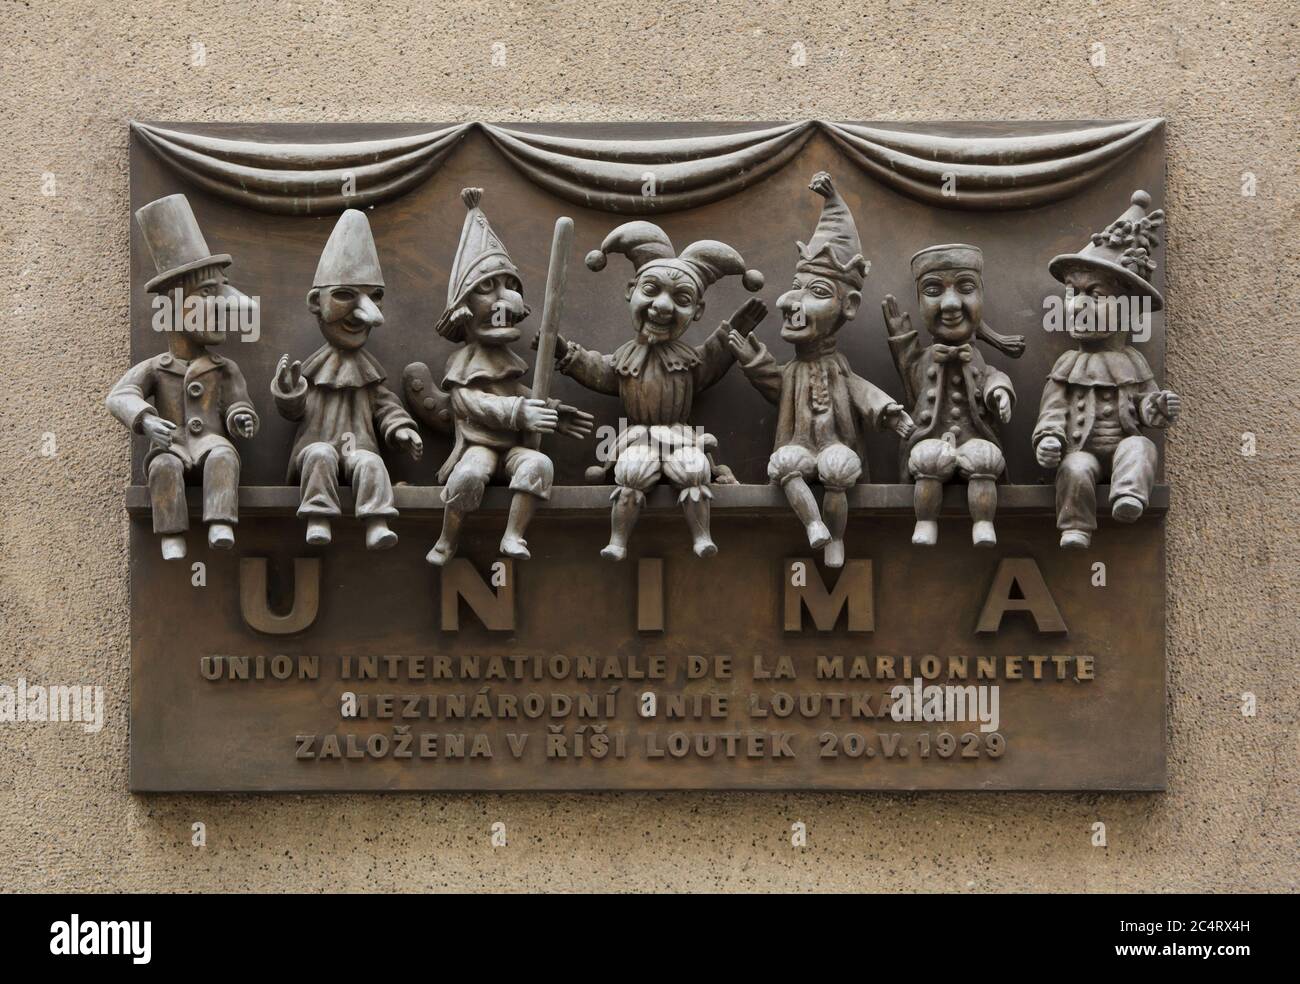 Commemorative plaque devoted to the UNIMA (Union Internationale de la Marionnette) on the building of the Puppet Empire Theatre (Divadlo Říše loutek) in Žatecká Street in Staré Město (Old Town) in Prague, Czech Republic. The International Puppetry Association was established in this theatre on 20 May 1929. Traditional national puppets are depicted on the plaque designed by Czech sculptor Bohumír Koubek and unveiled in 1979. Belgian Tchantchès, Italian Pulcinella, English Punch, Czech Kašpárek, Russian Petrushka, French Guignol and German Kasperl are depicted from left to right. Stock Photo